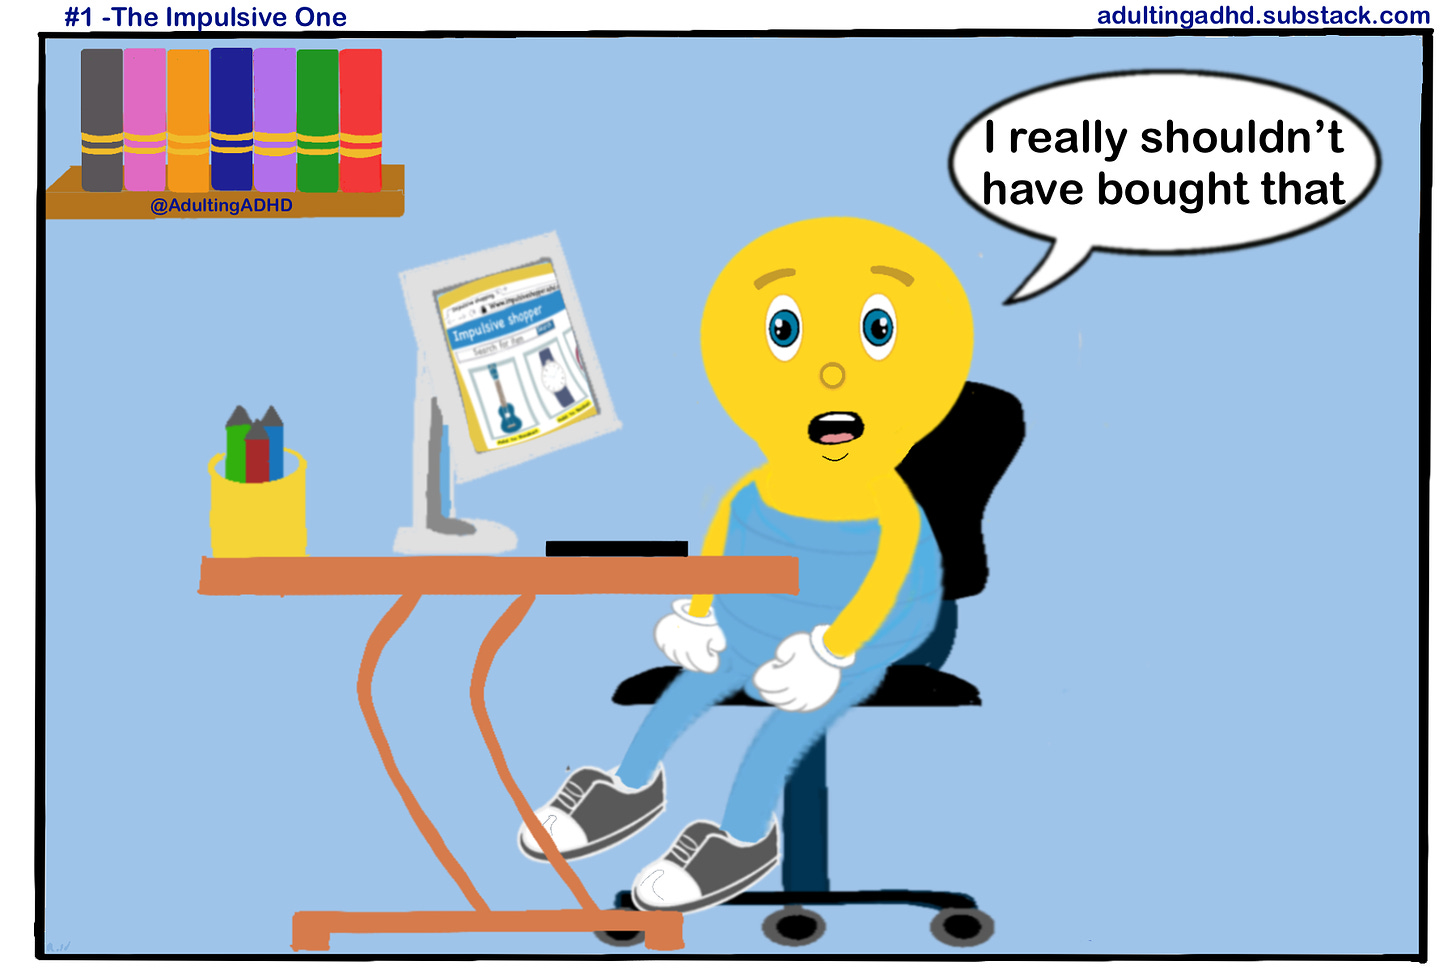 A character that's looks like a lightbulb with a human body and facial features, sat in a room at a desk that has a computer, a desk and a keyboard on it. There’s also a bookshelf with 7 books on it in the room. There is a speech bubble by the character which says “I really shouldn’t have bought that”.